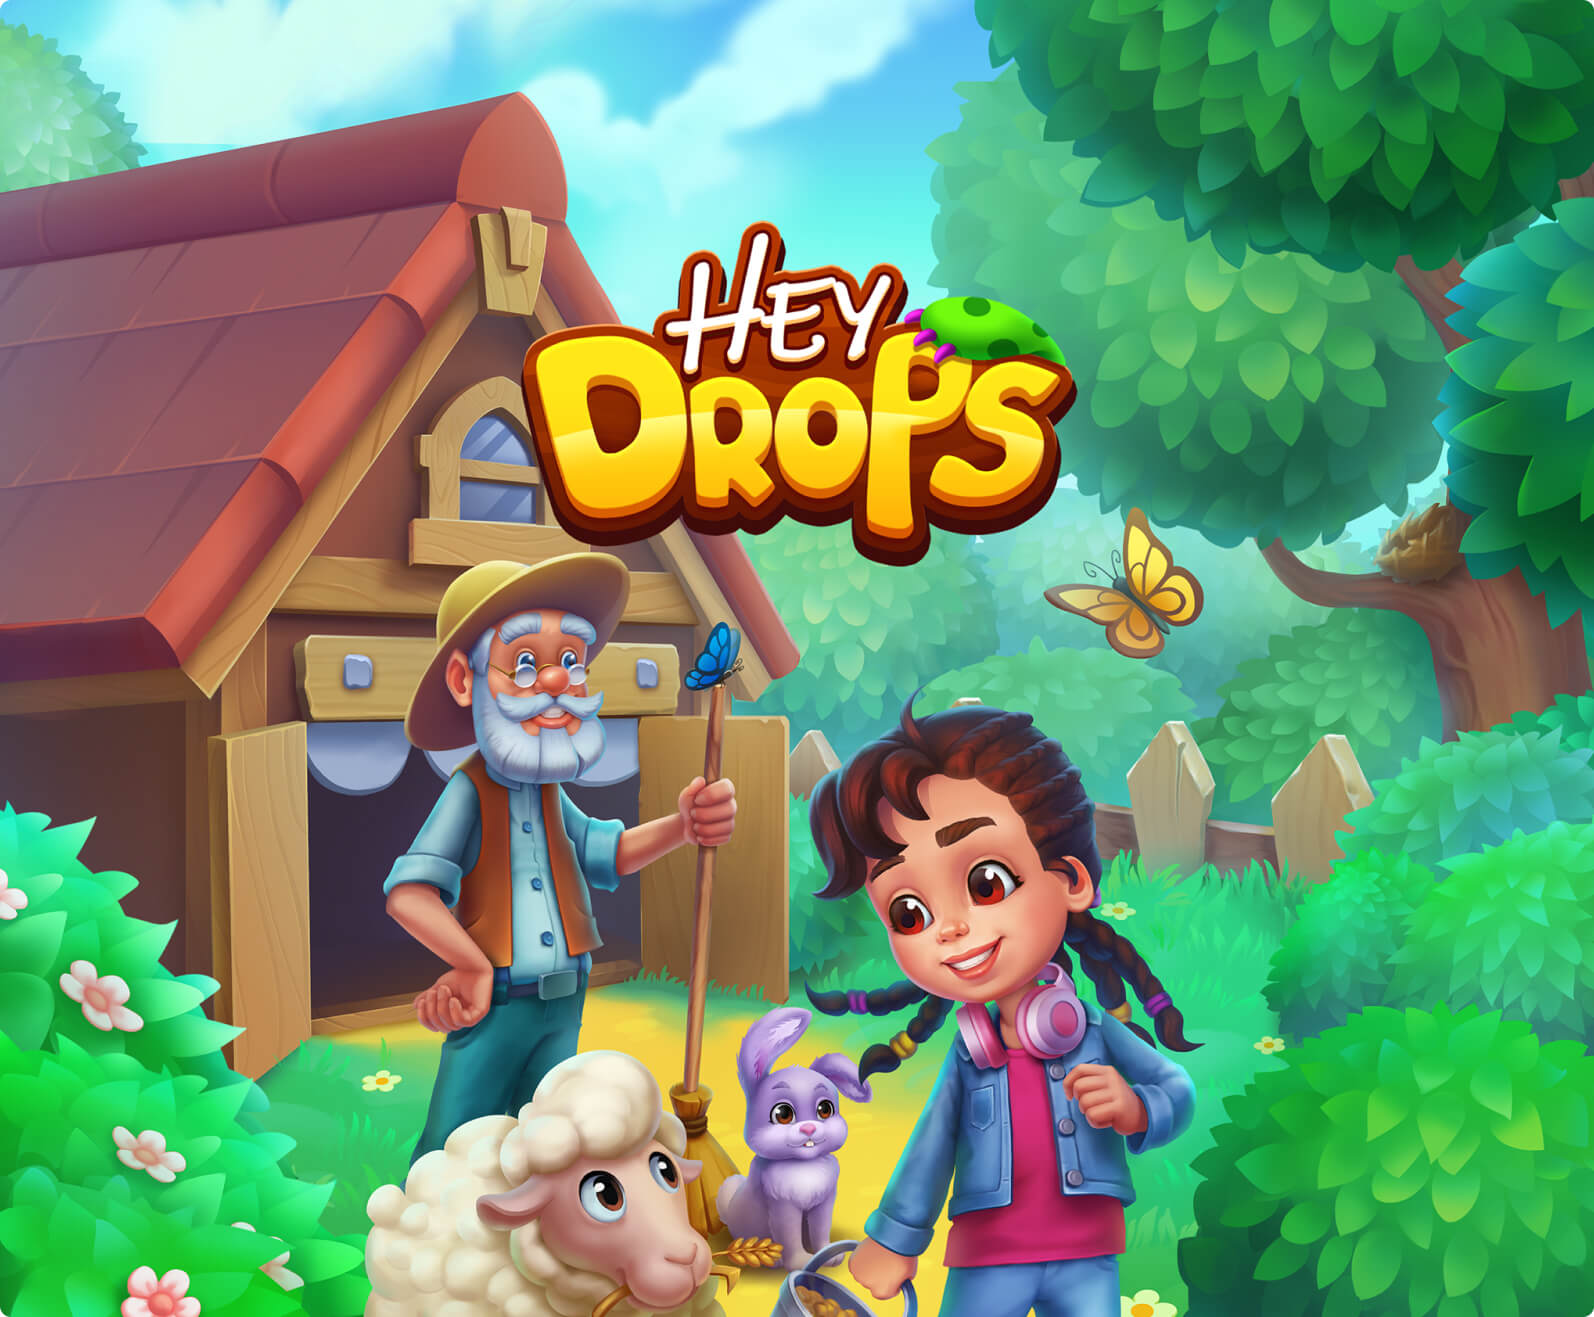 Hey Drops Game Character and illustration design